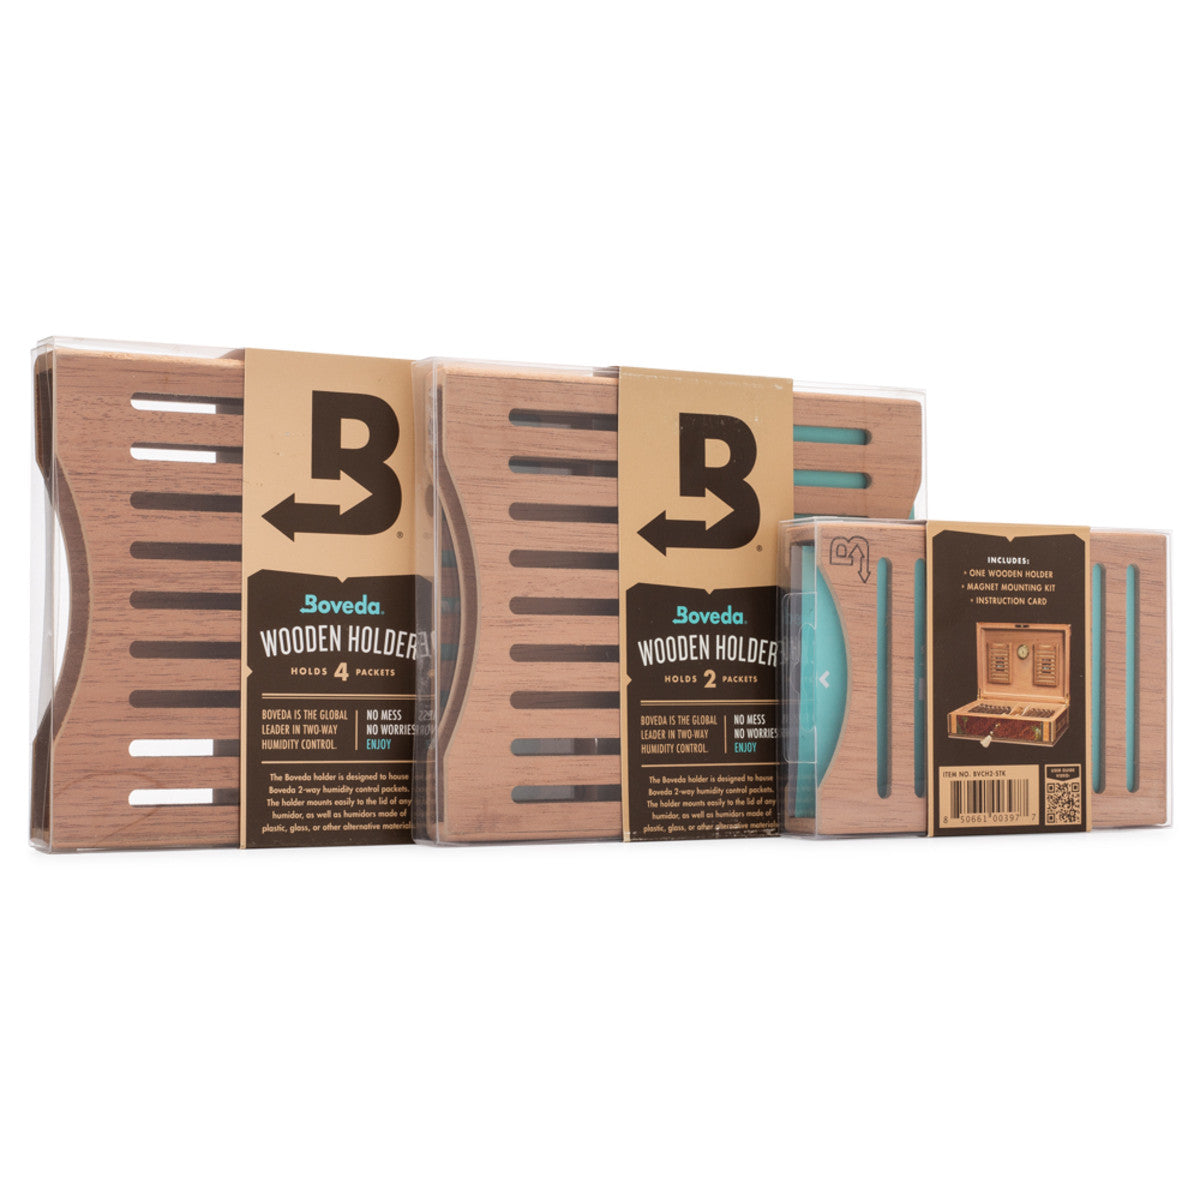 WOODEN HOLDER FOR CONTAINERS HOLDS (4) 60 GRAM BOVEDA